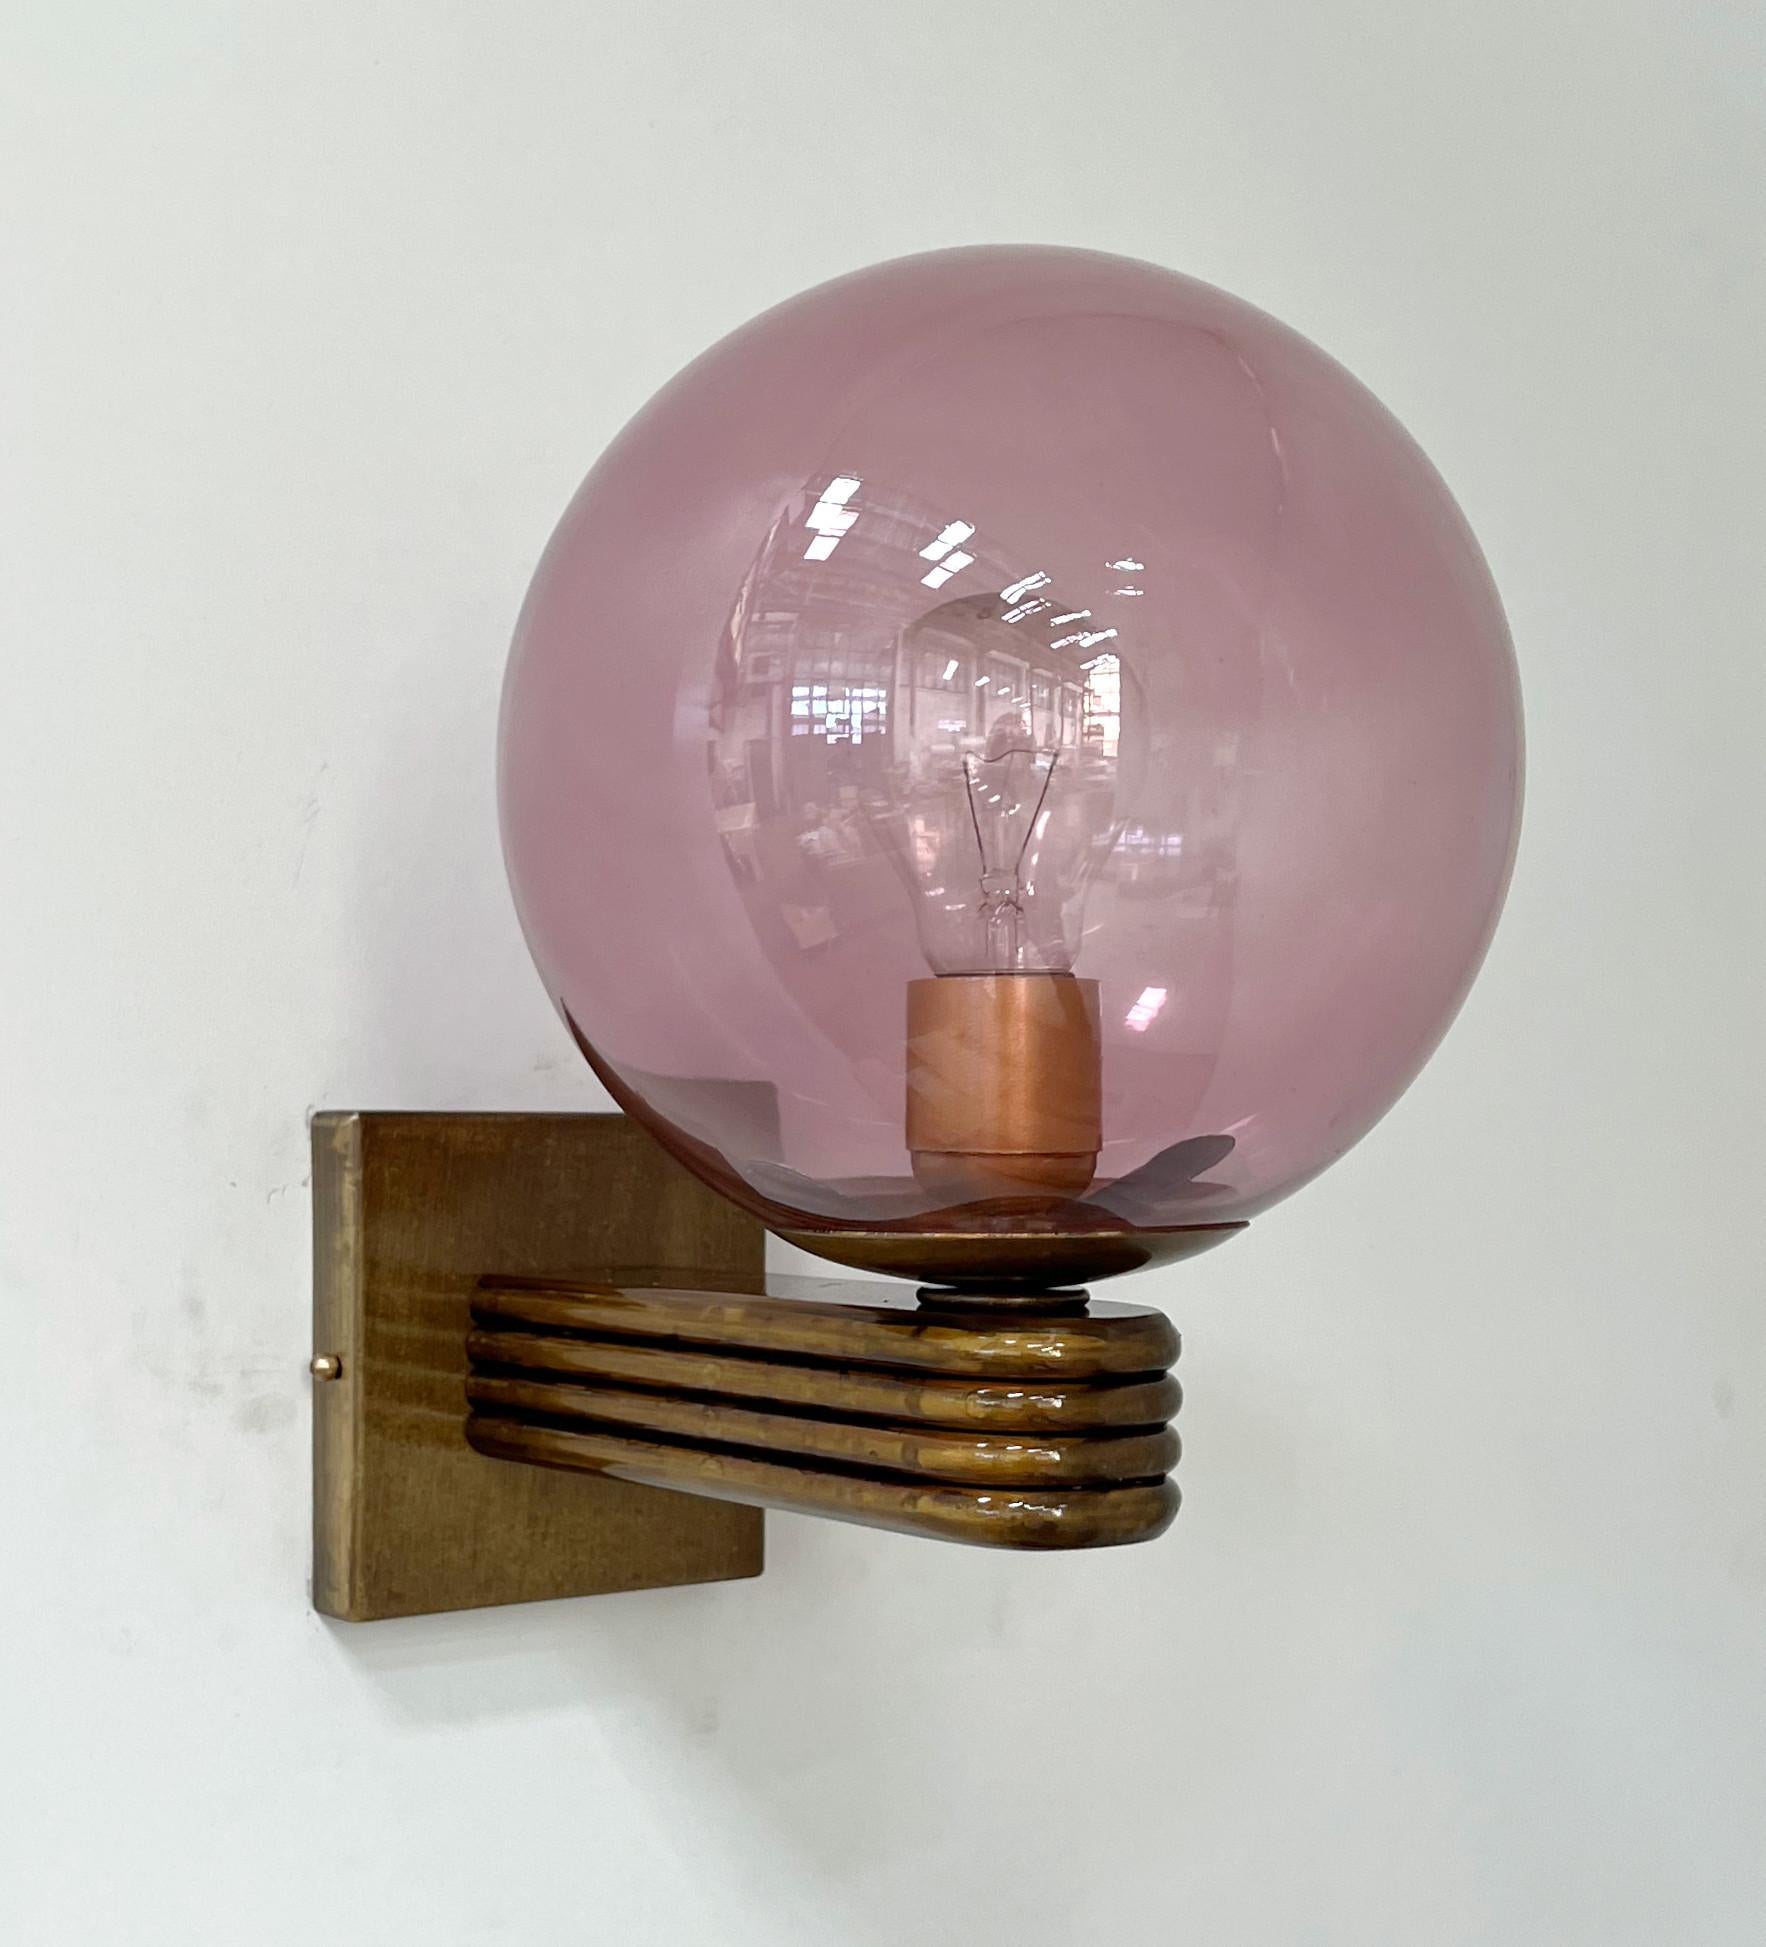 Italian Art Deco style wall light with transparent pink coral Murano glass globe mounted on bronzed finish frame, designed by Fabio Bergomi for Fabio Ltd, made in Italy
1 light / E12 or E14 type / max 40W
Measures: Height 12 inches, width 8 inches,